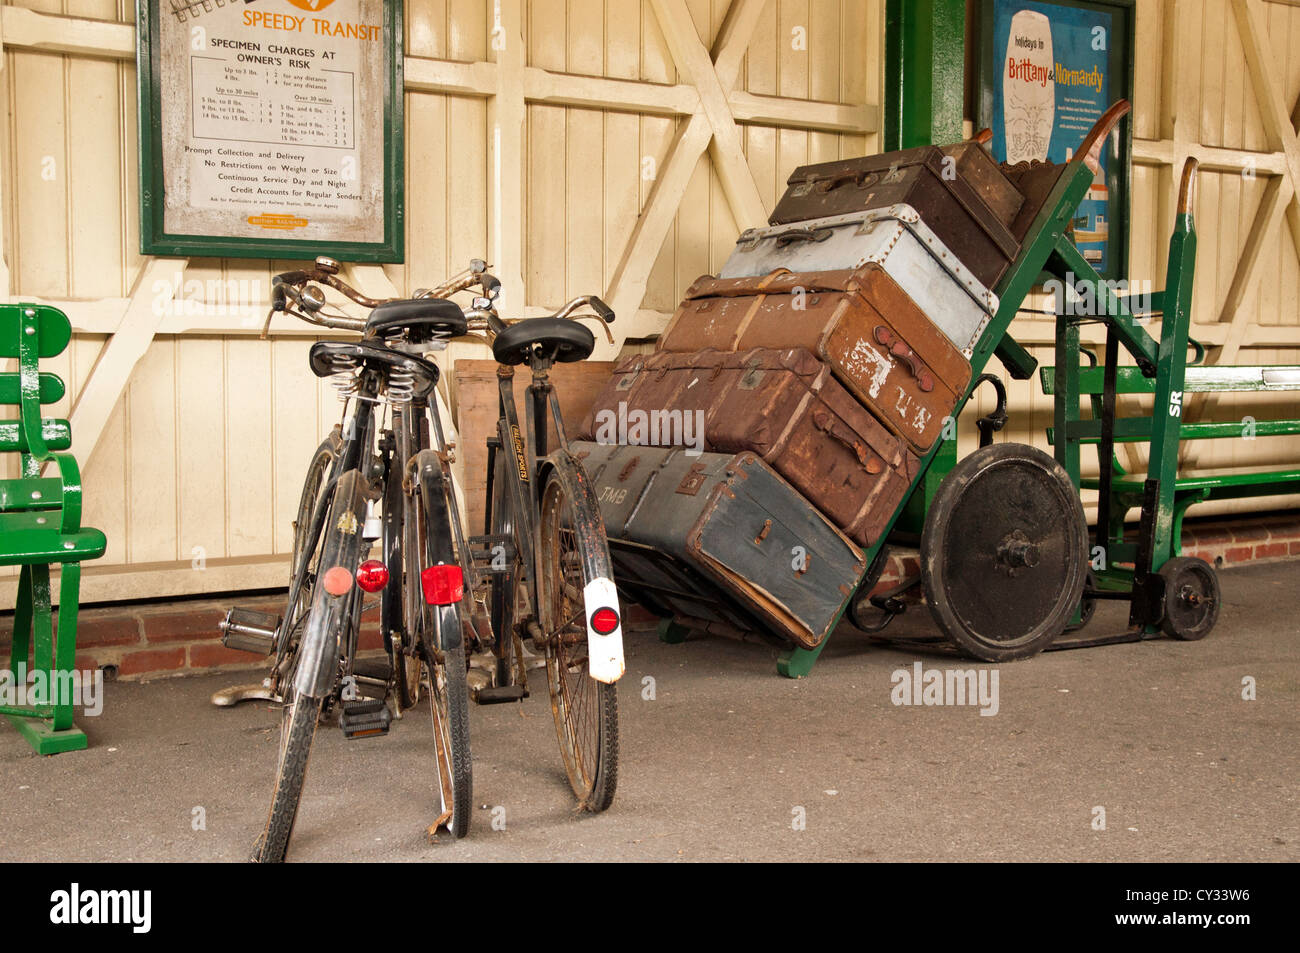 Left luggage on platform with Bicycles and trolly Stock Photo